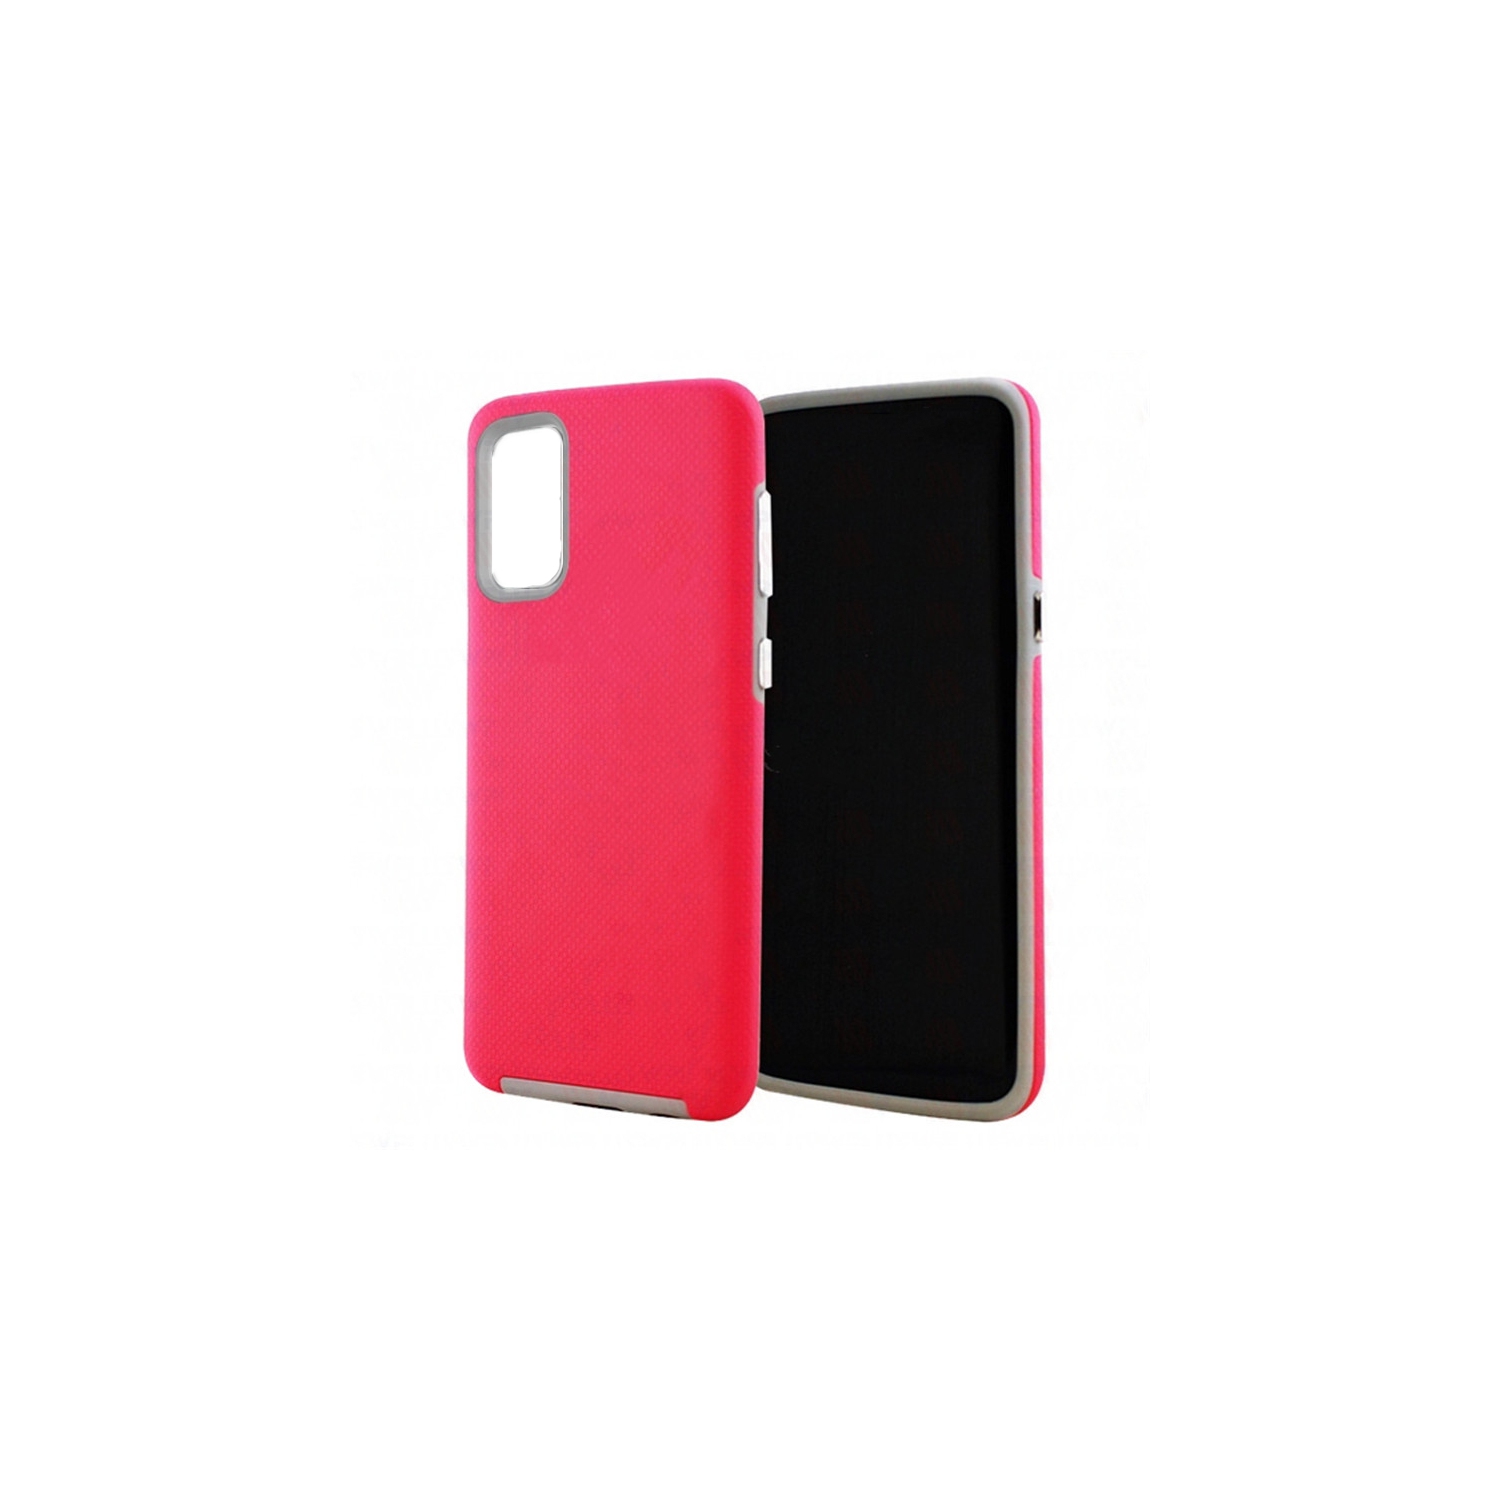 【CSmart】 Slim Fitted Hybrid Hard PC Shell Shockproof Scratch Resistant Case Cover for Samsung Galaxy A73 5G (2022), Hot Pink